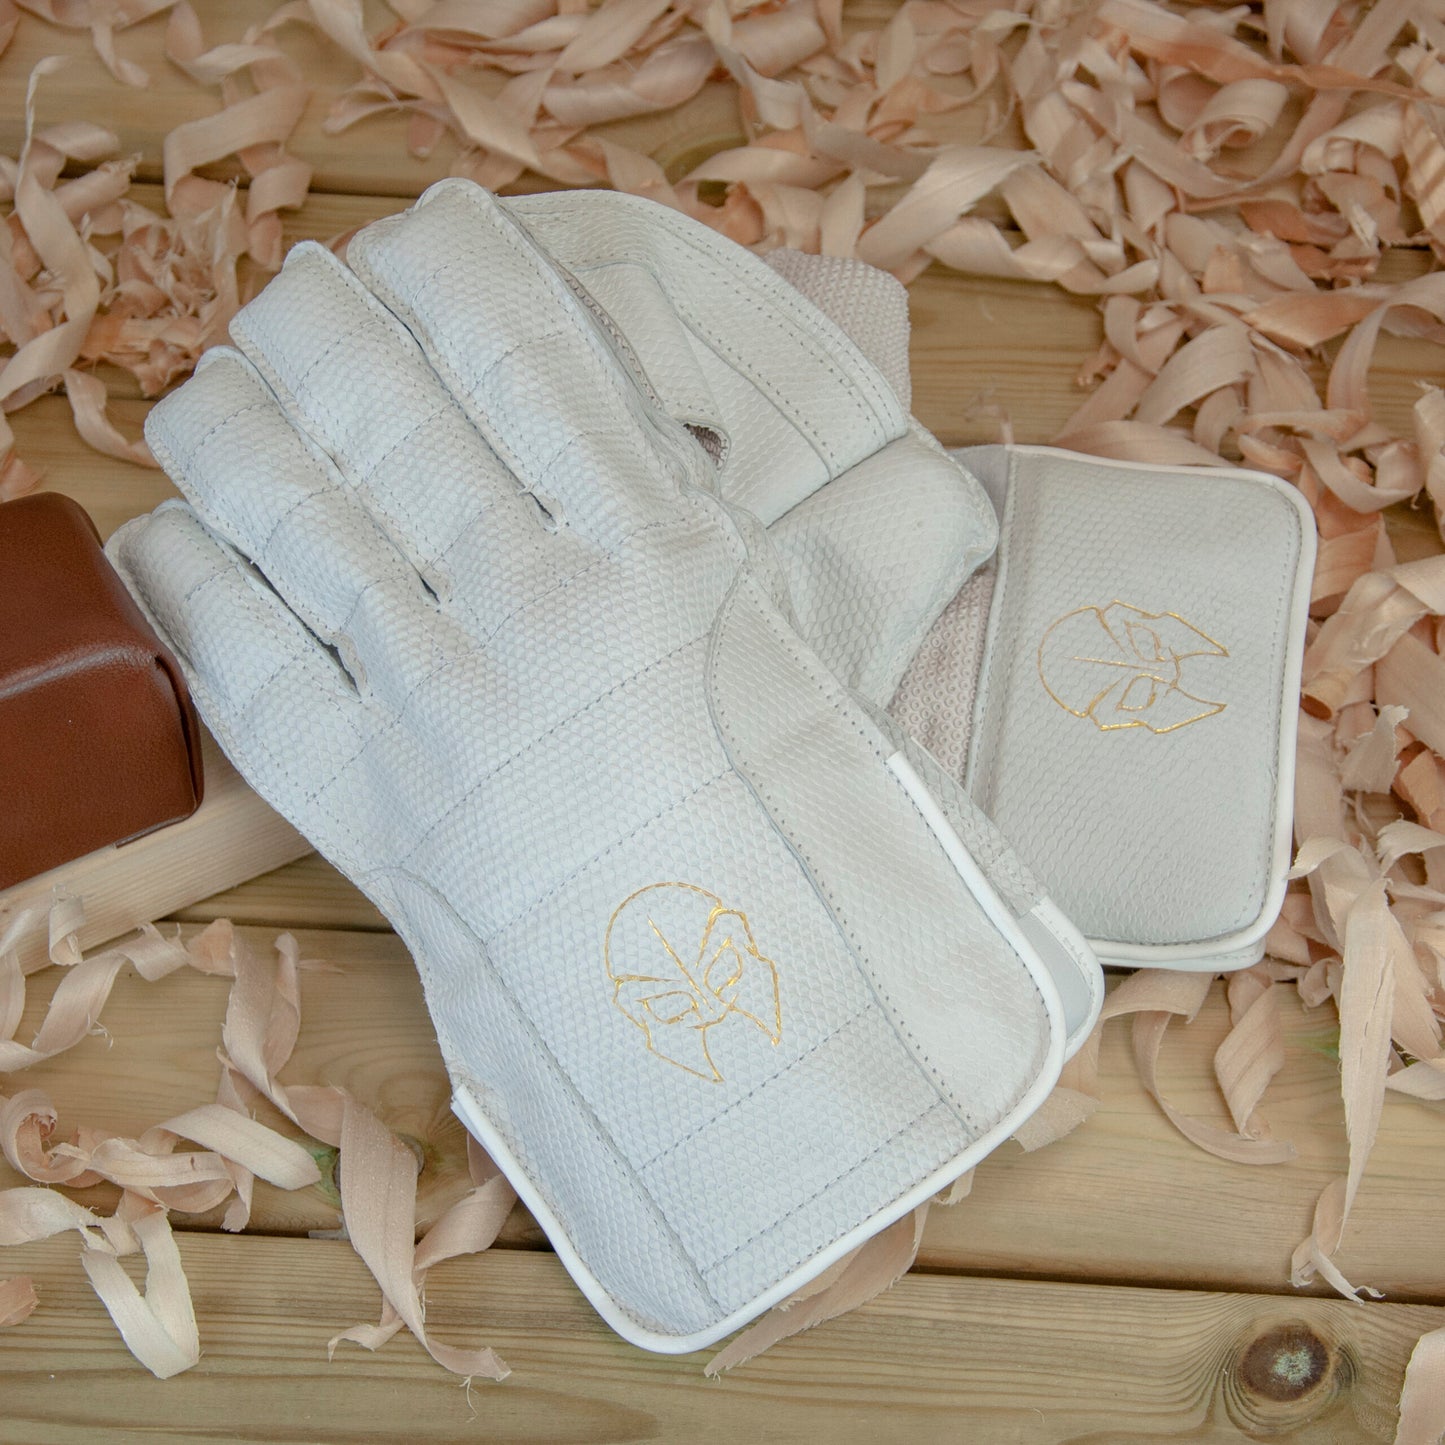 Limited WK Gloves